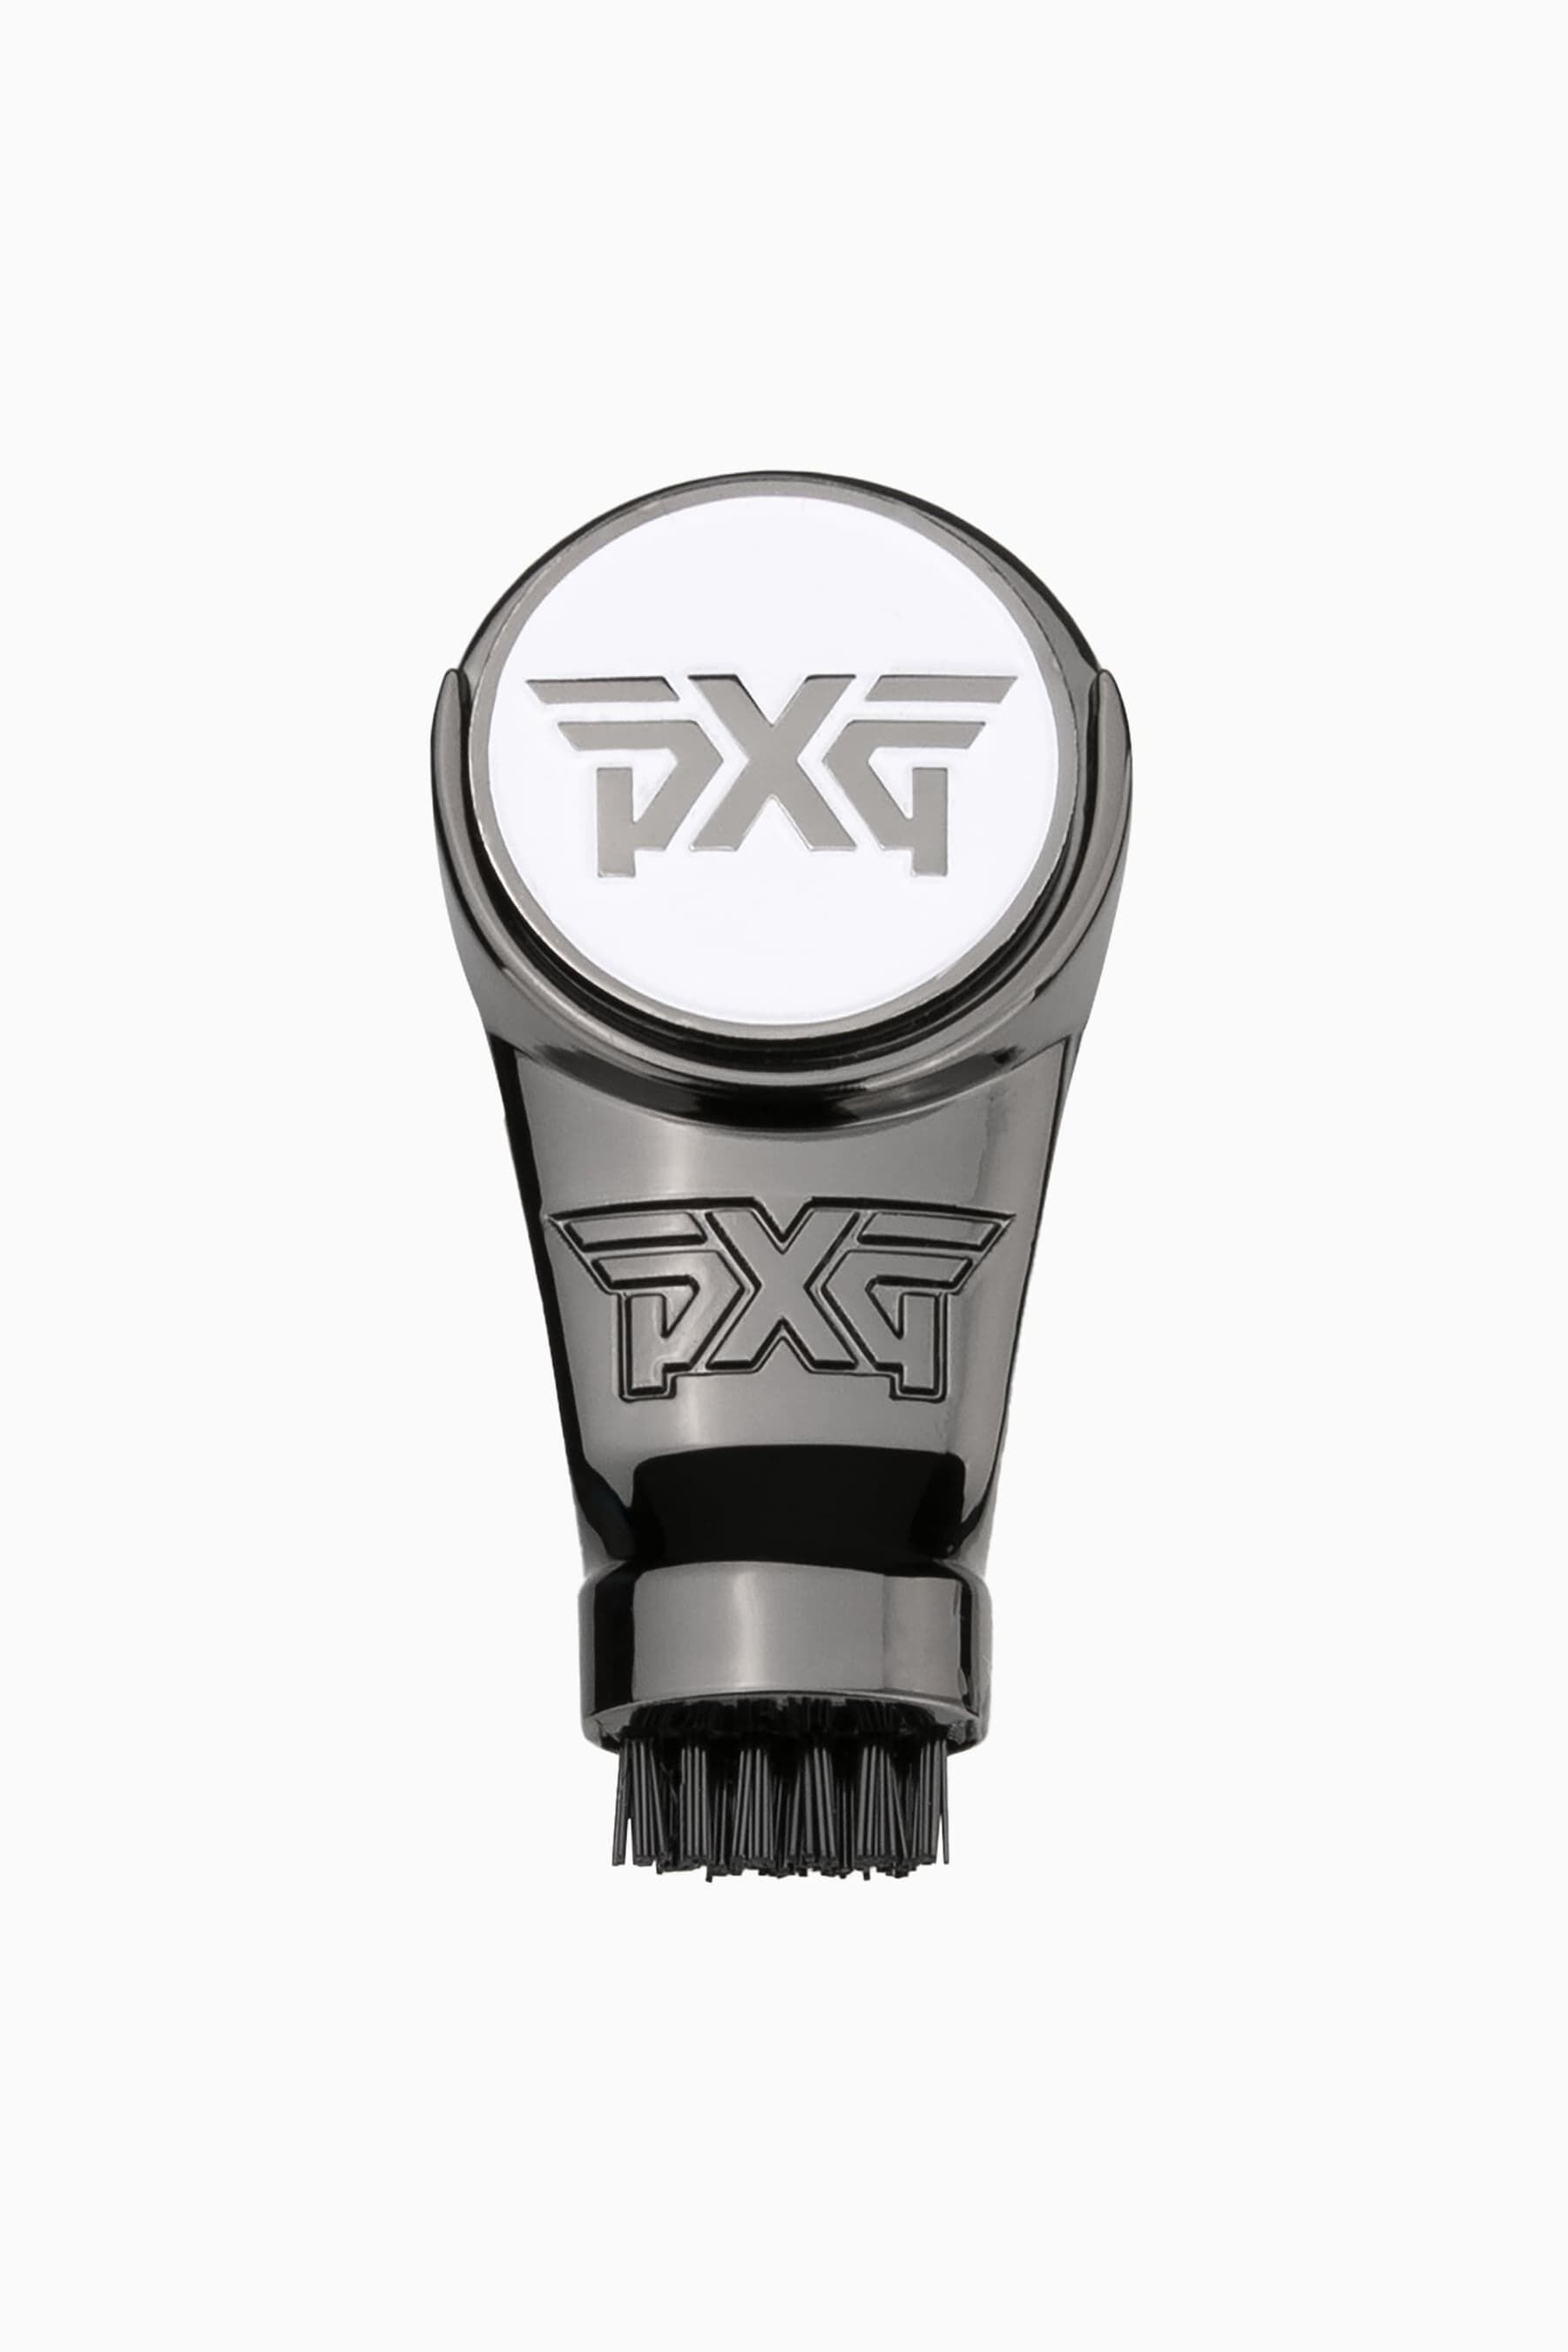 Buy Wedge Brush with Ball Marker PXG